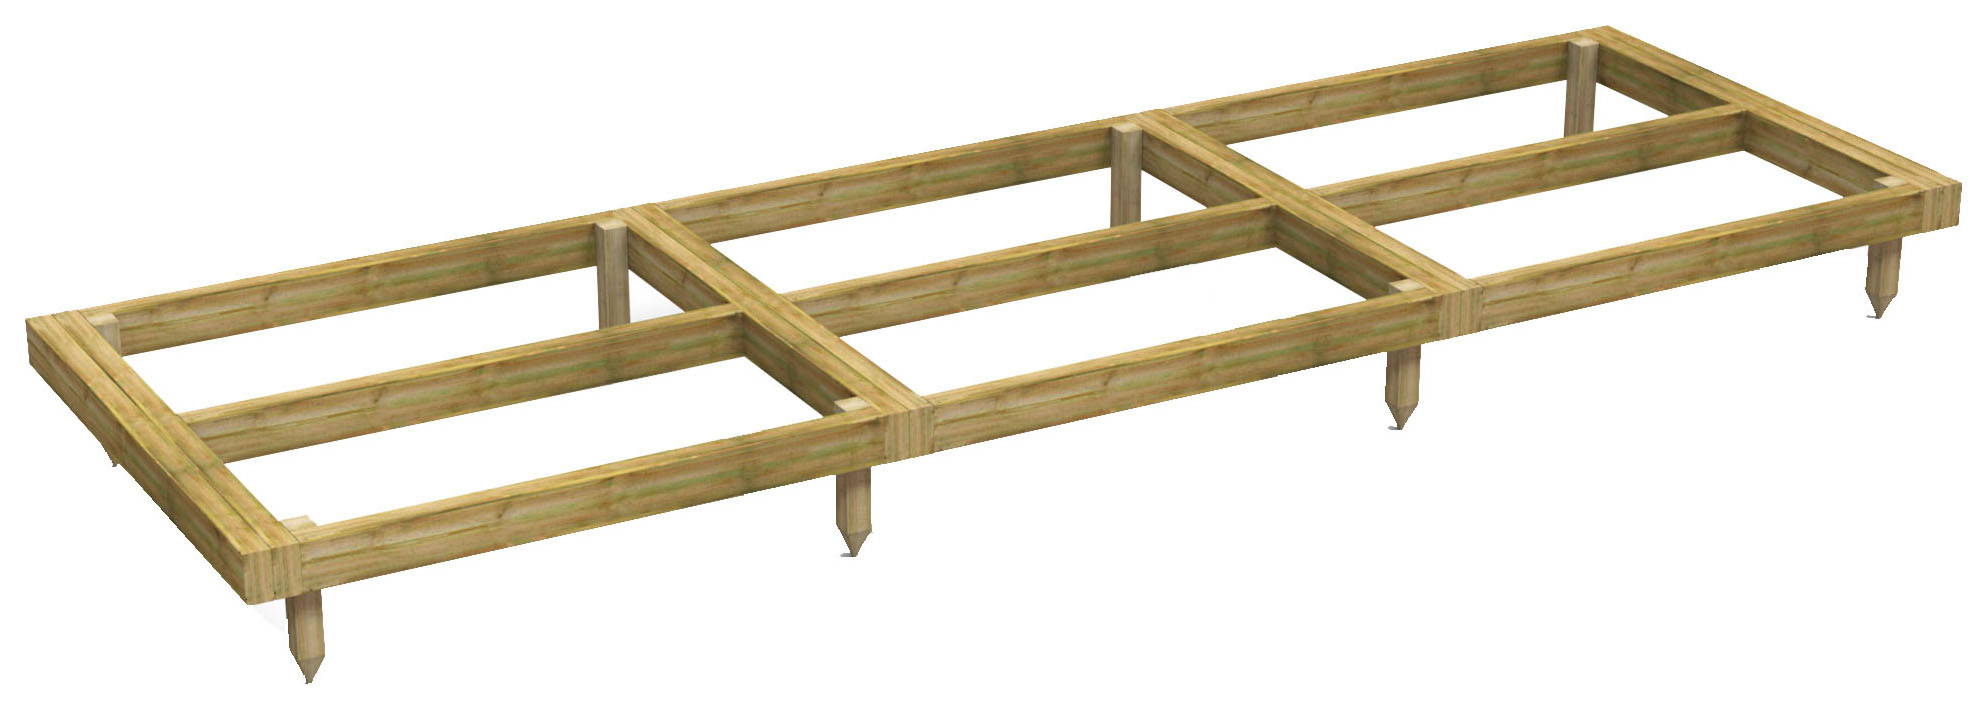 Image of Power Sheds 12 x 4ft Pressure Treated Garden Building Base Kit